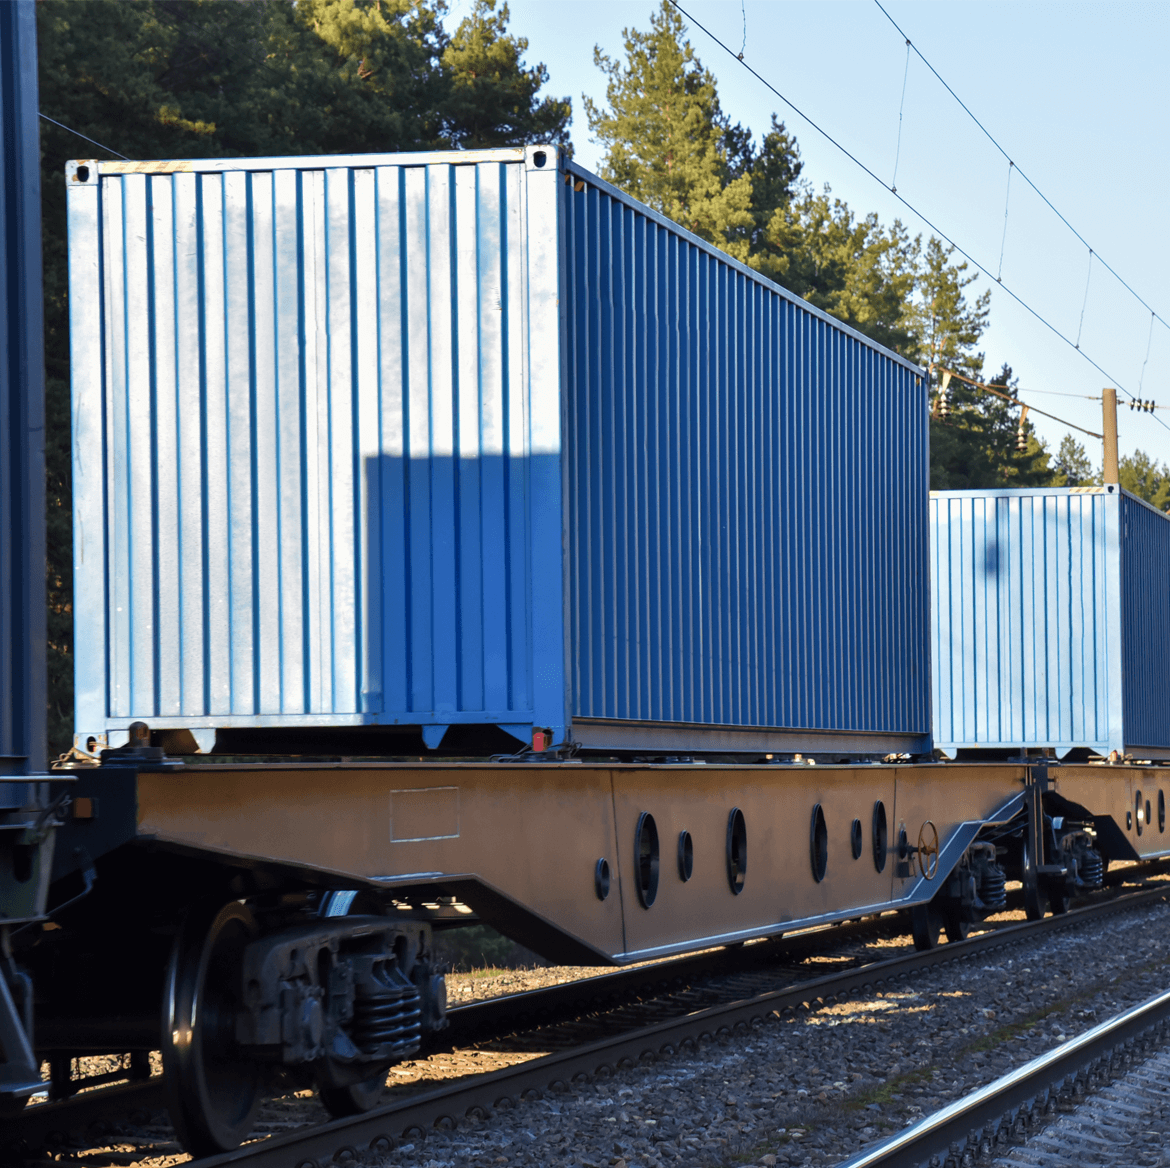 A train carrying blue cargo containers on its journey.